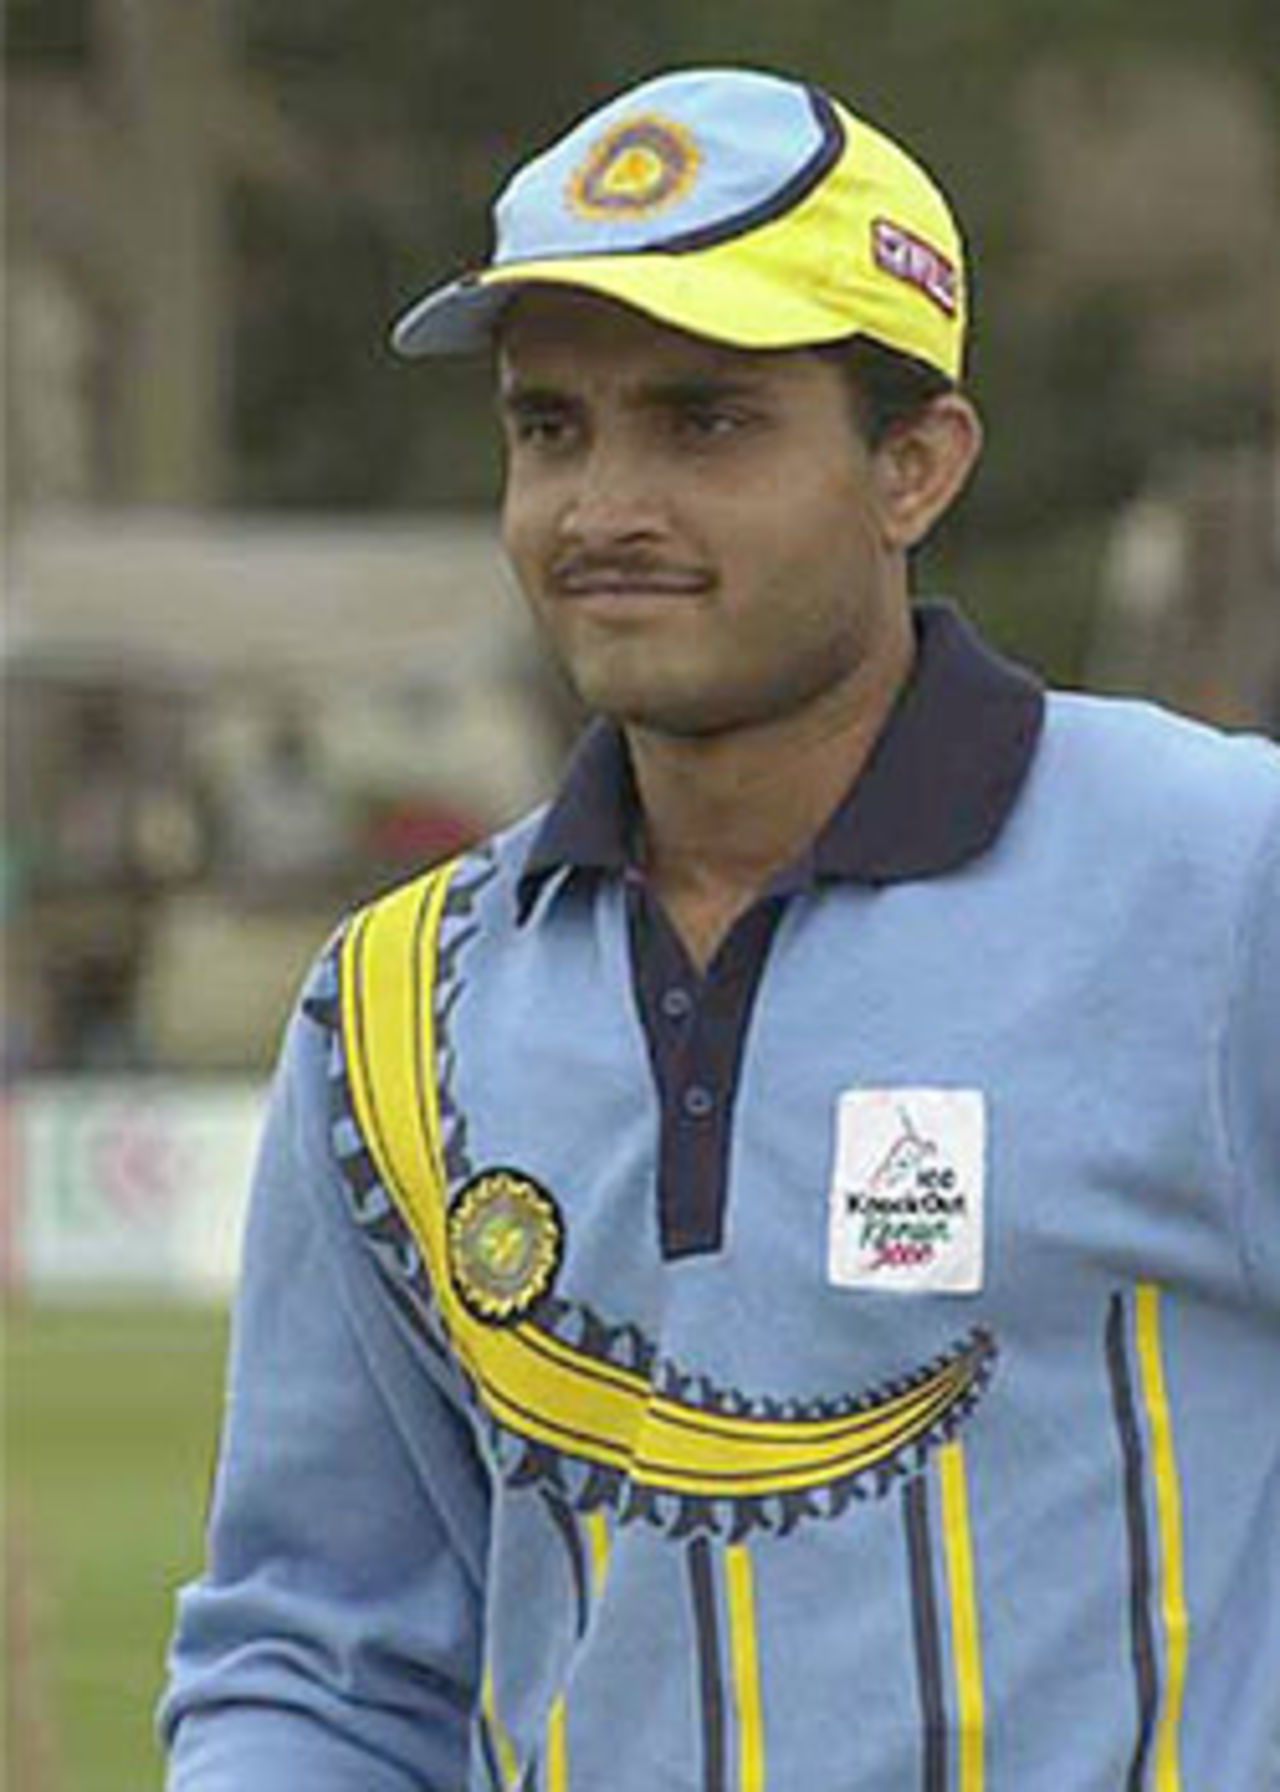 A beaming Ganguly soon after the toss before the start of the final, ICC KnockOut, 2000/01, Final, India v New Zealand, Gymkhana Club Ground, Nairobi, 15 October 2000.